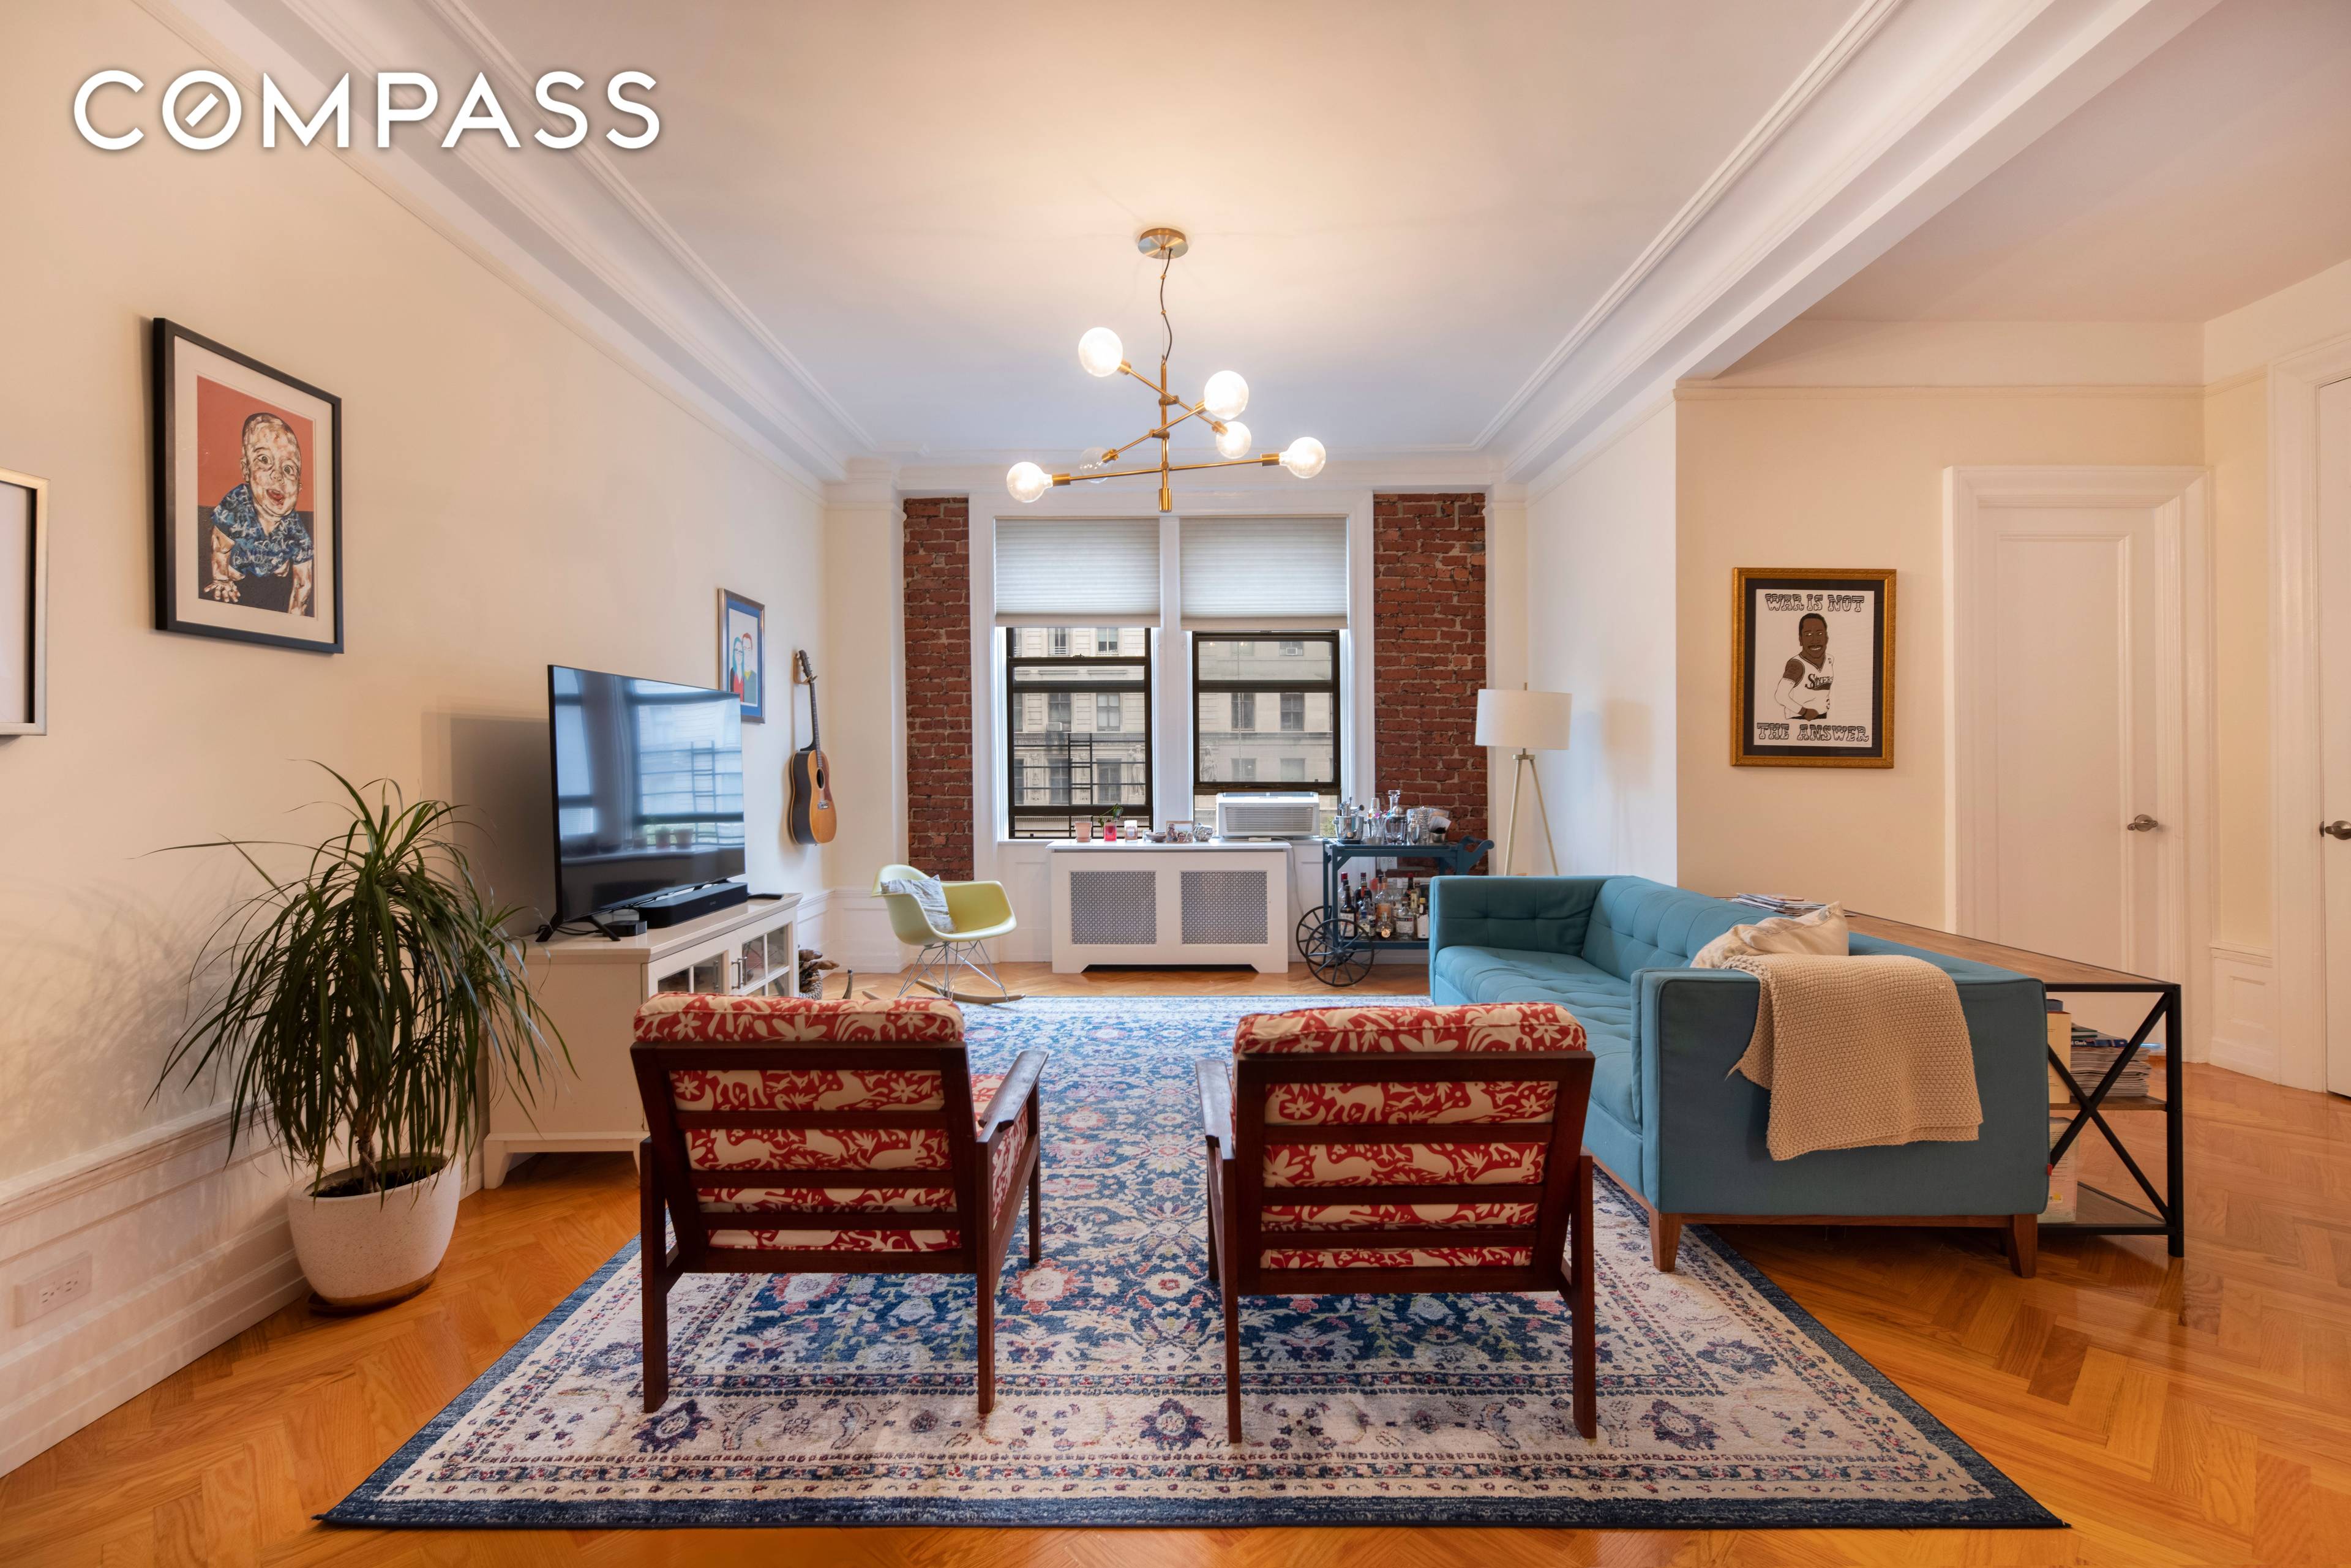 3 bedroom, each room fits a king 3 walk in closets Views of the Apthorp s architectural sculptures Expansive living room and dining room Kitchen features Stainless Steel appliances with ...